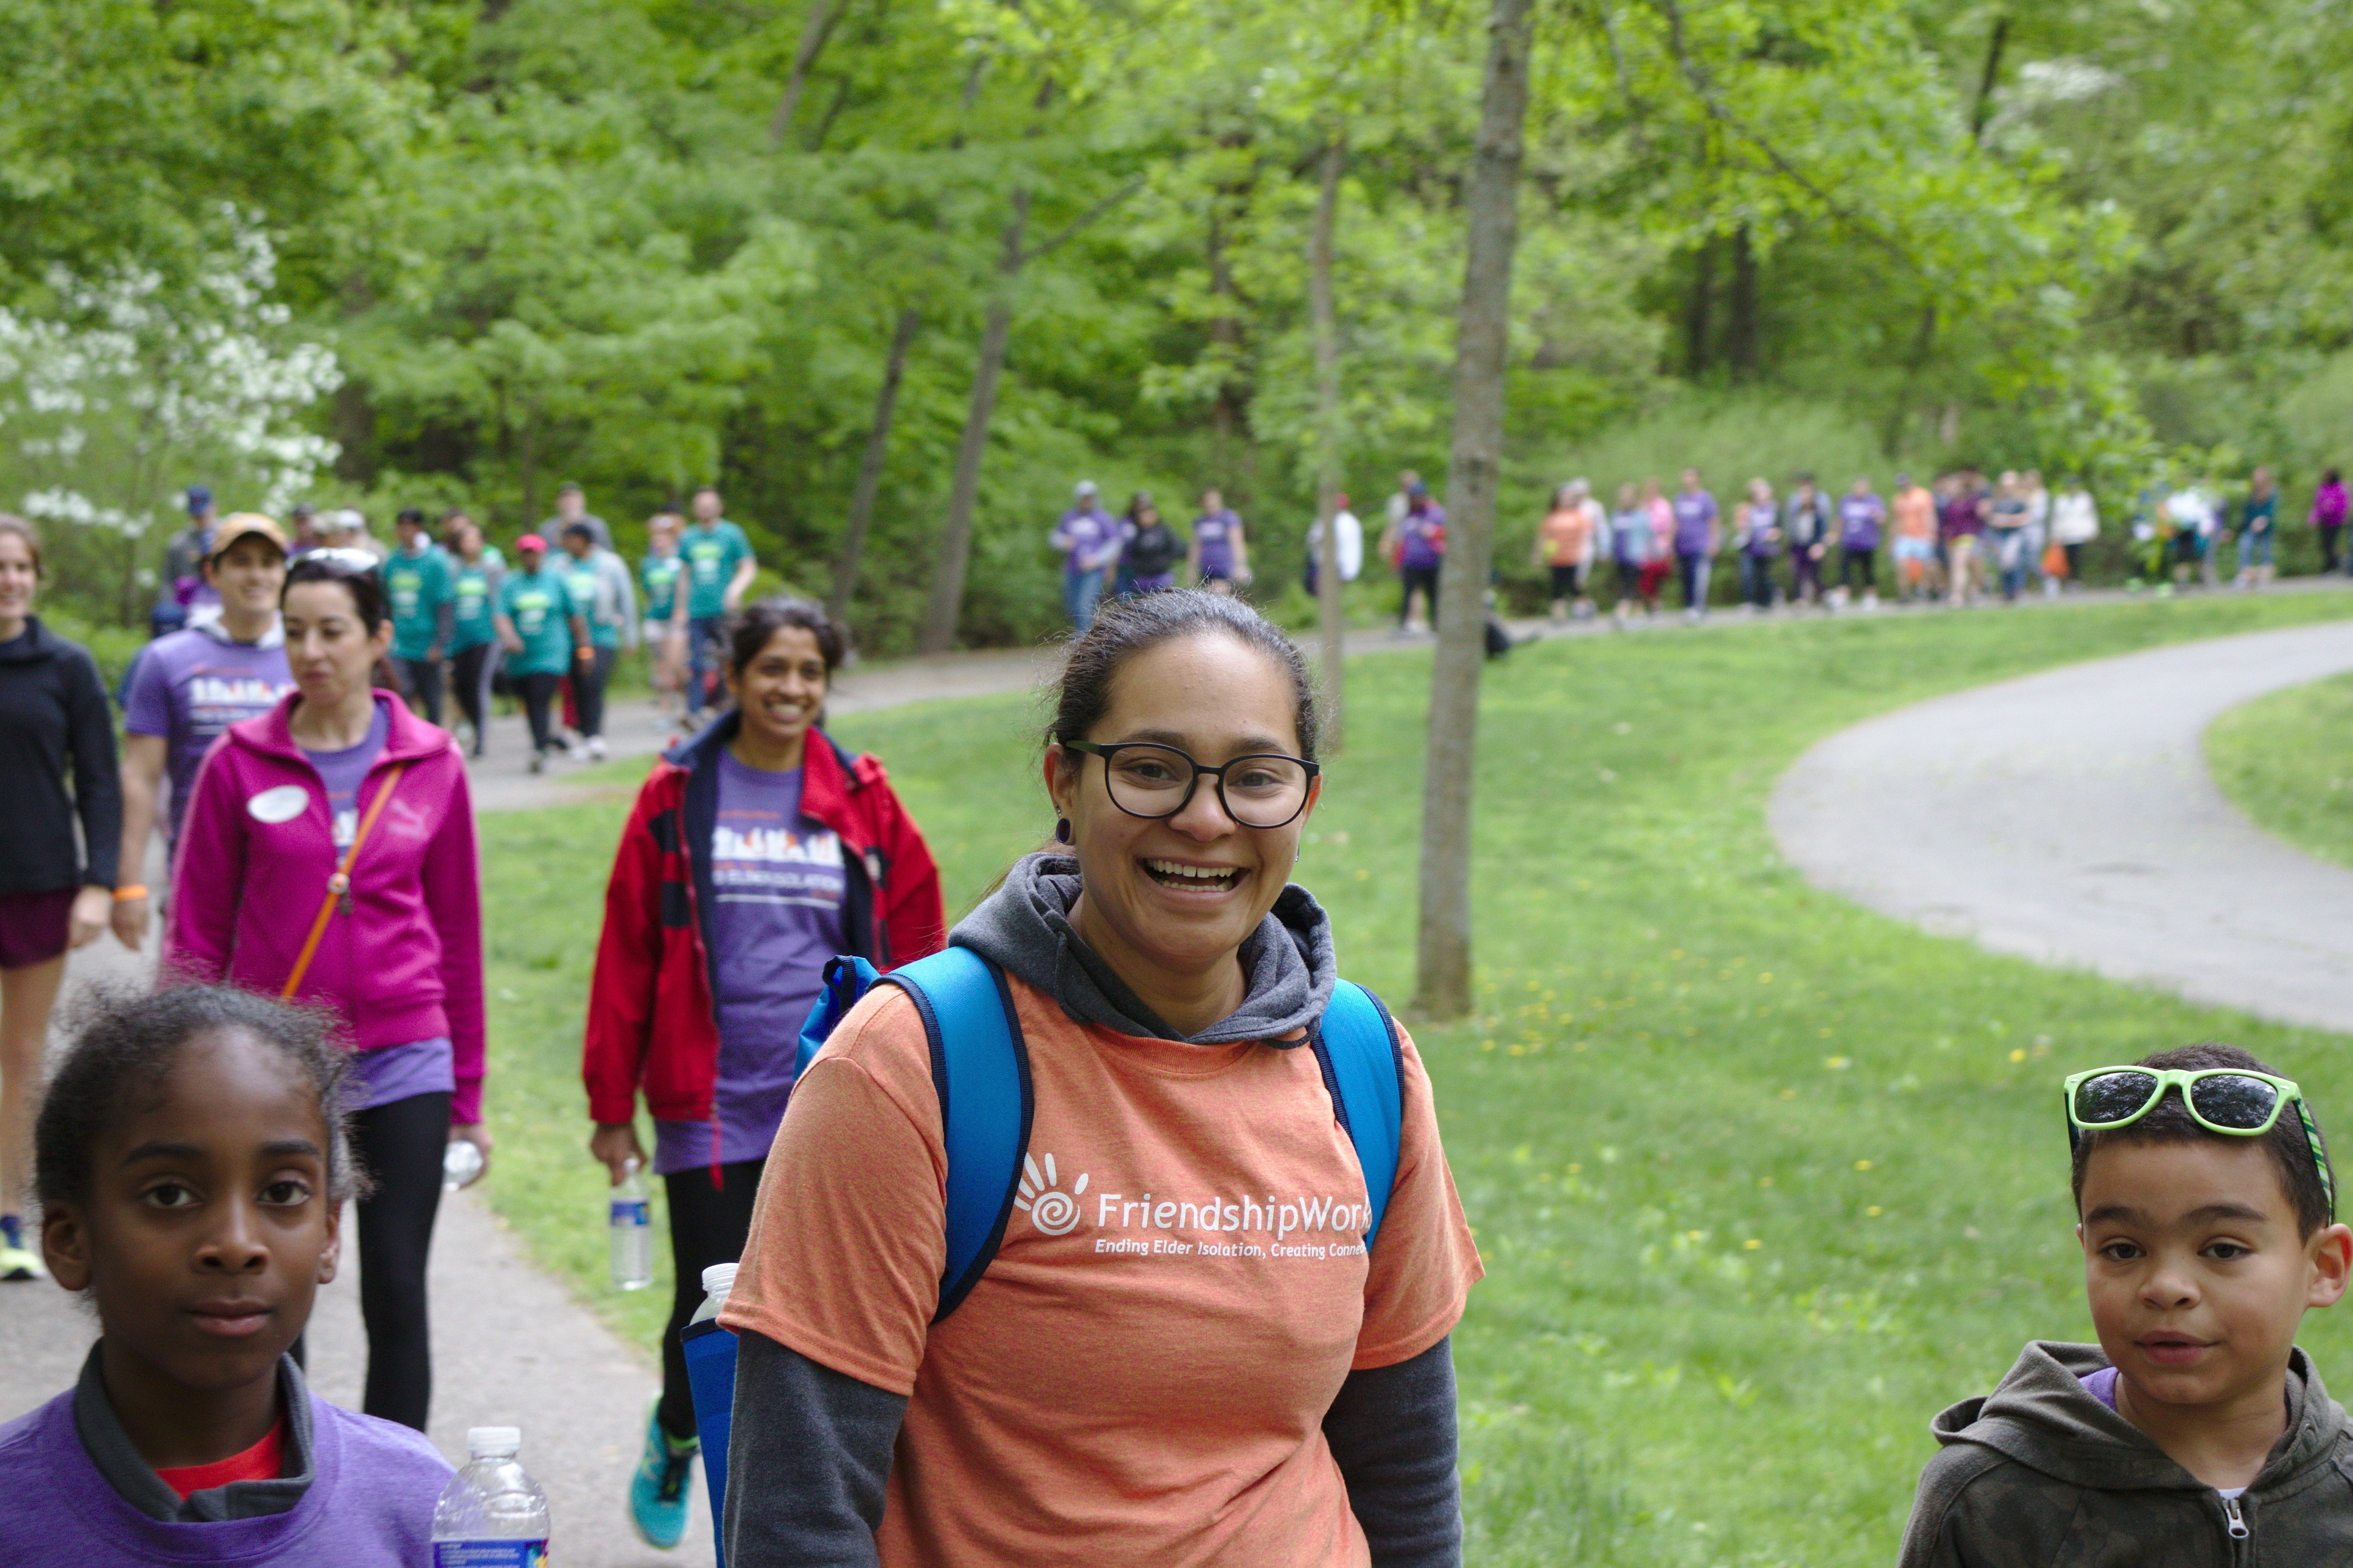 FriendshipWorks staff member with young walkers